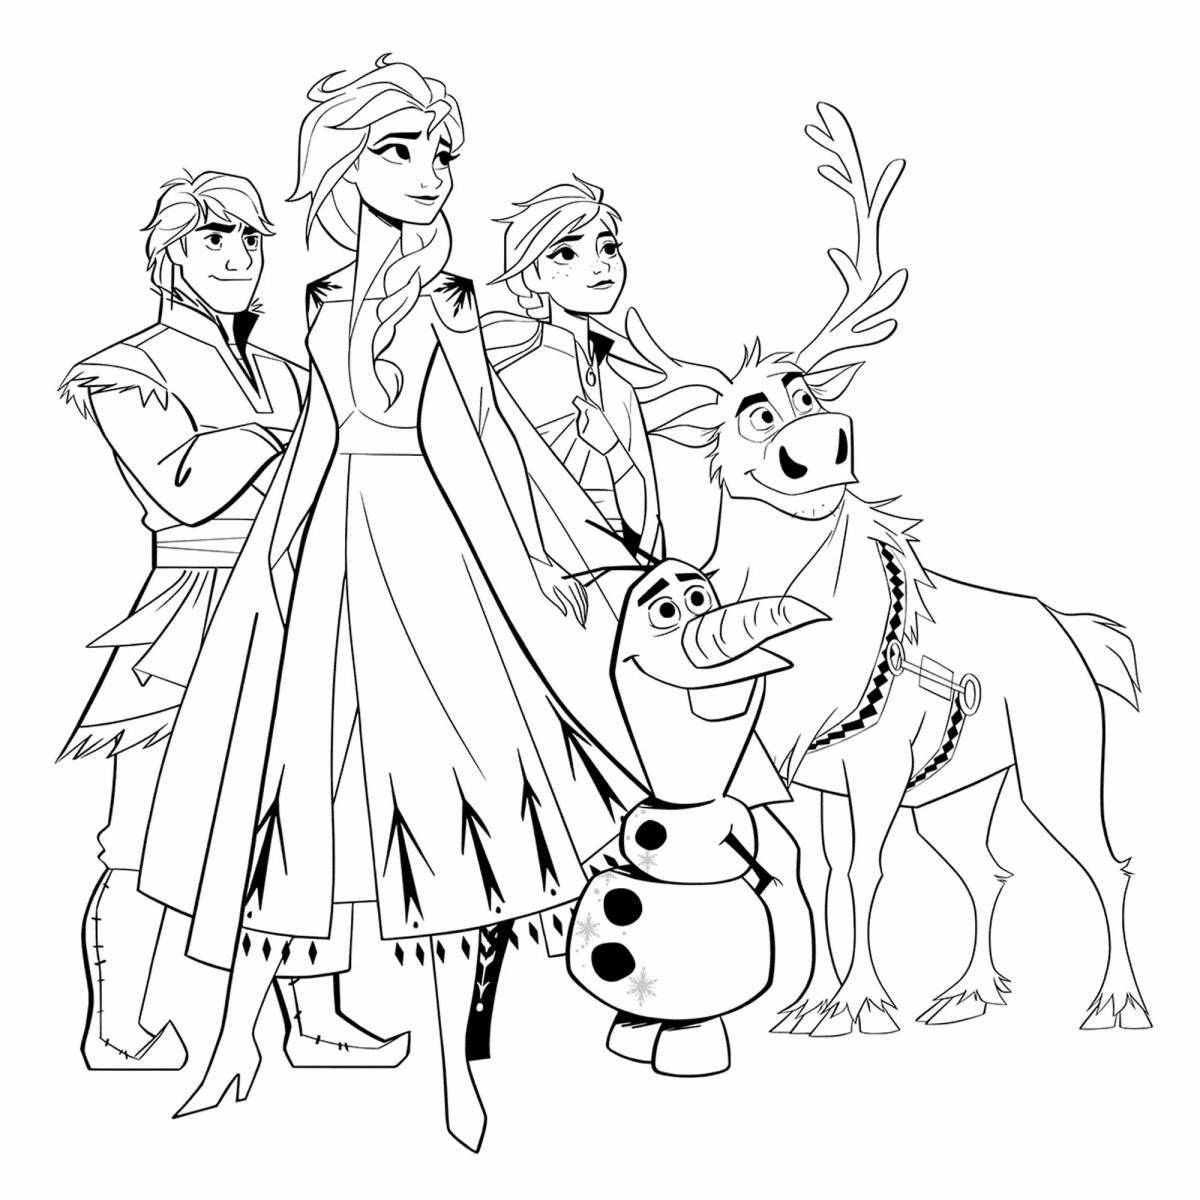 Glitter Frozen coloring page for 6-7 year olds